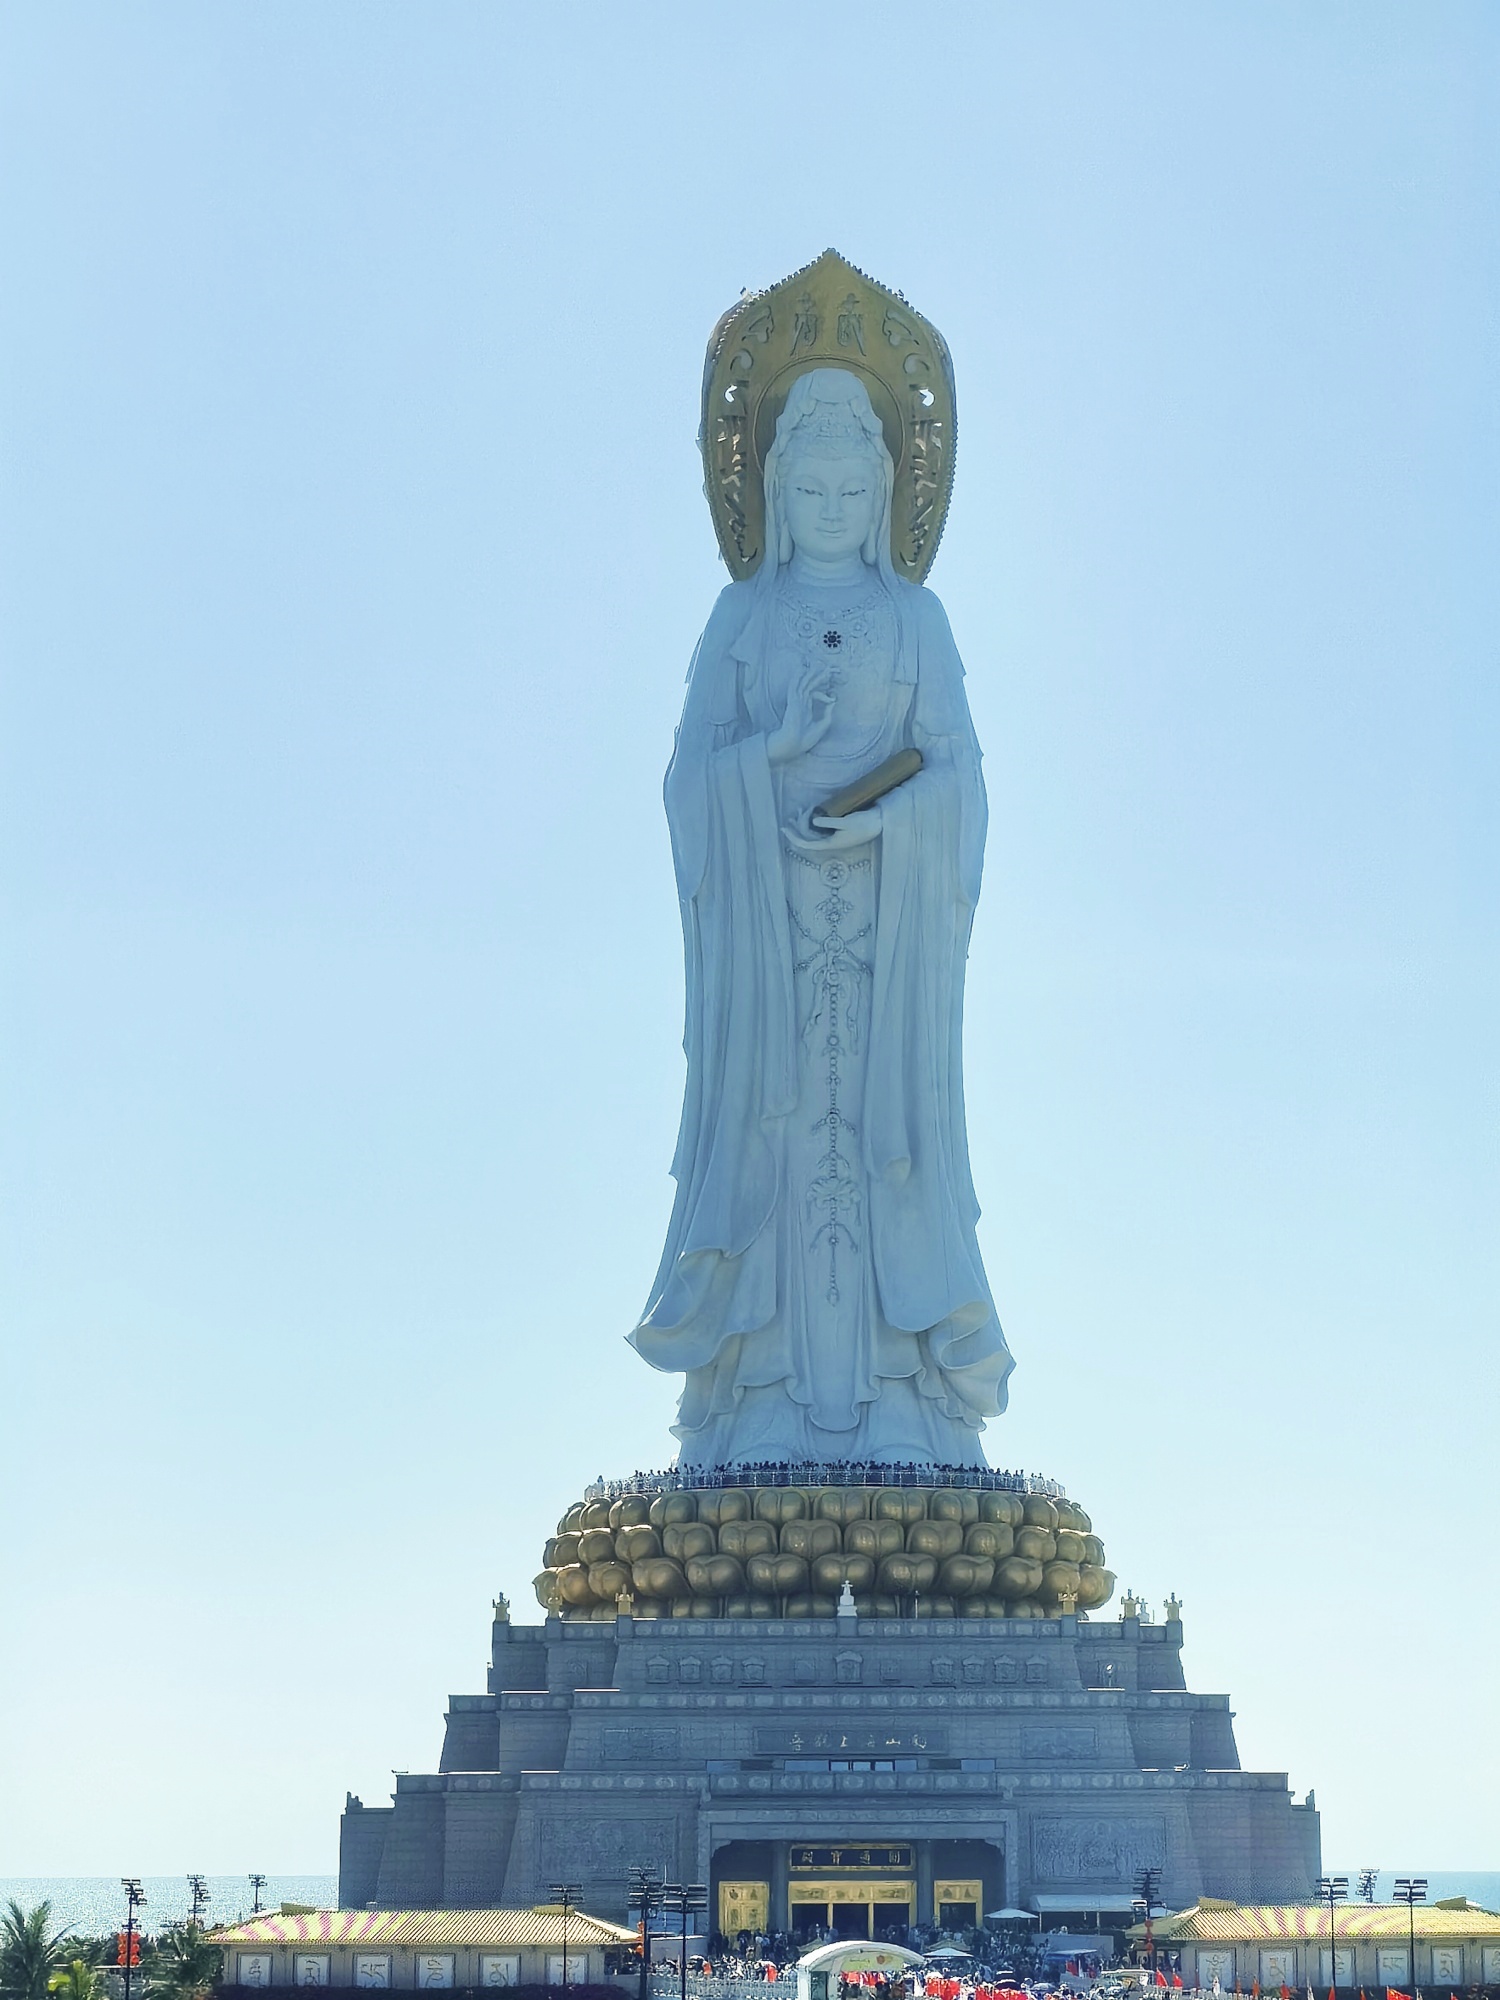 The 108-meter-tall Guanyin statue in Sanya, south China's Hainan Province is seen in this undated photo. /CGTN